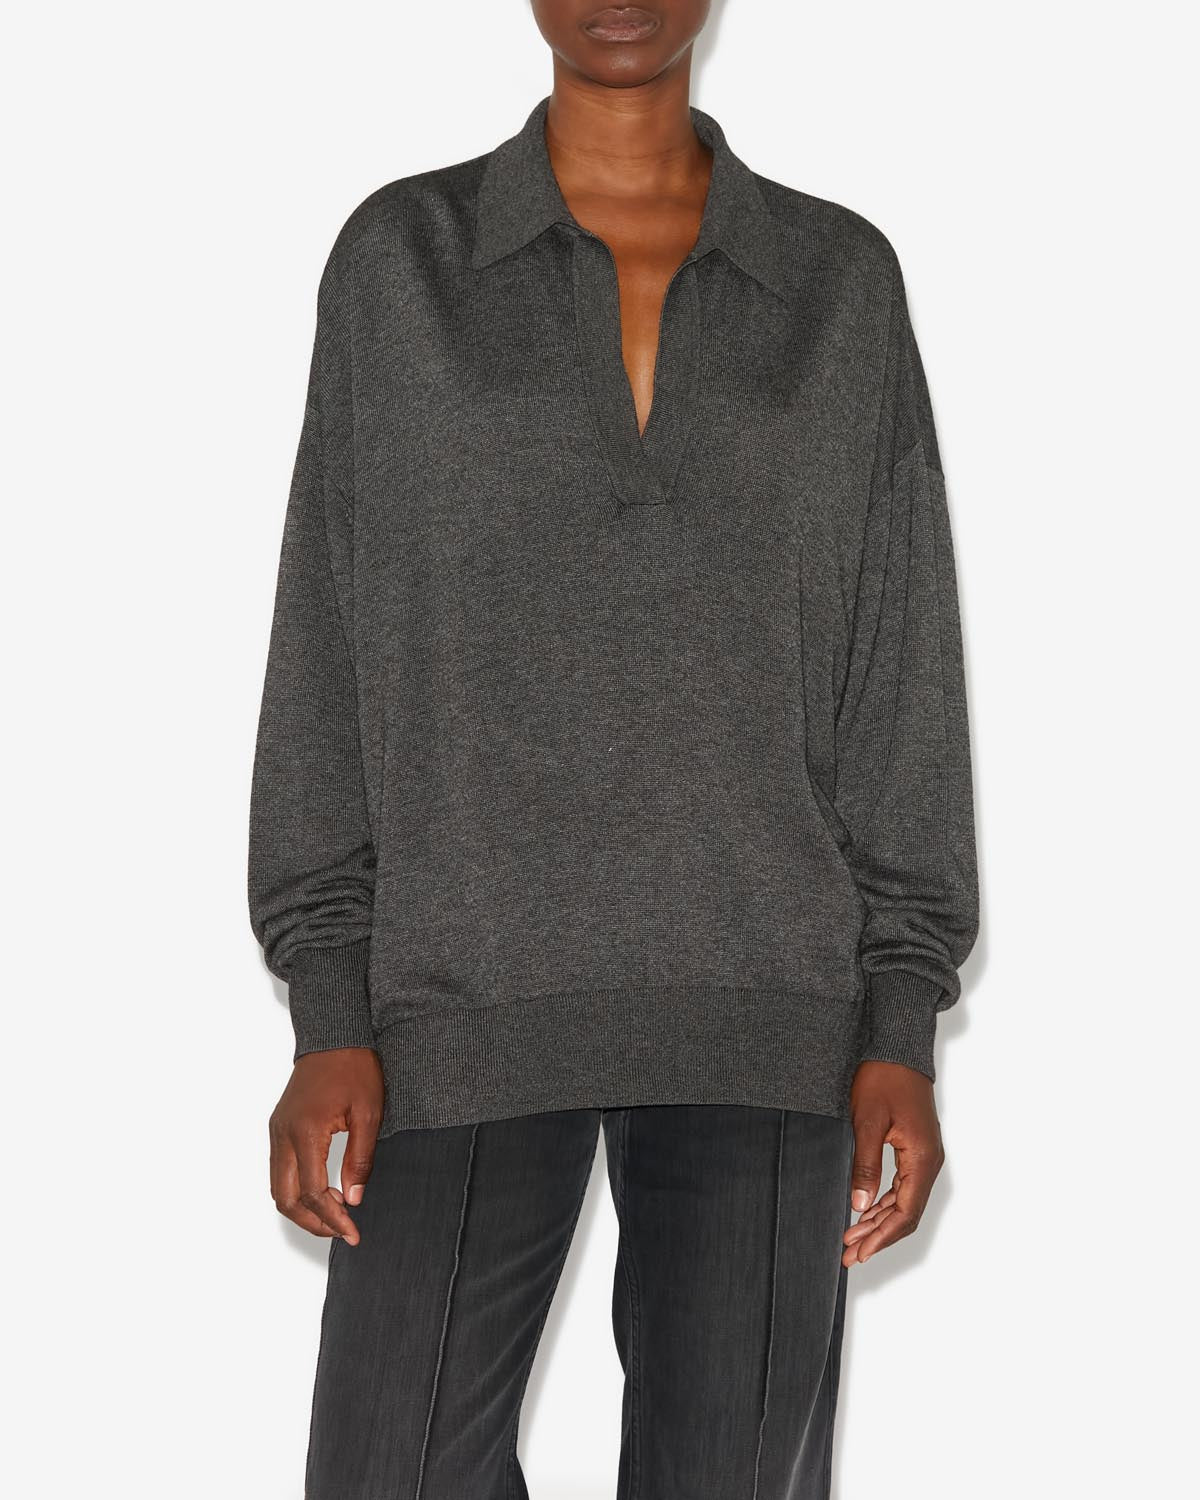 Galix pullover Woman Anthracite 4